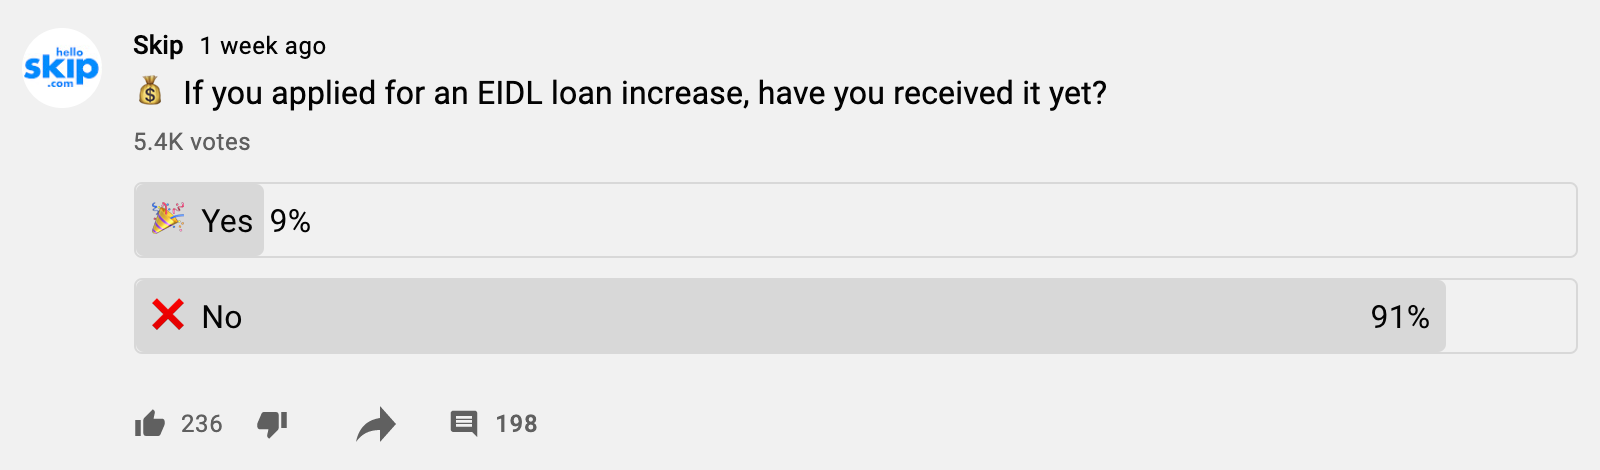 https://static.helloskip.com/blog/2021/06/Have-you-received-an-EIDL-loan-increase-yet.png